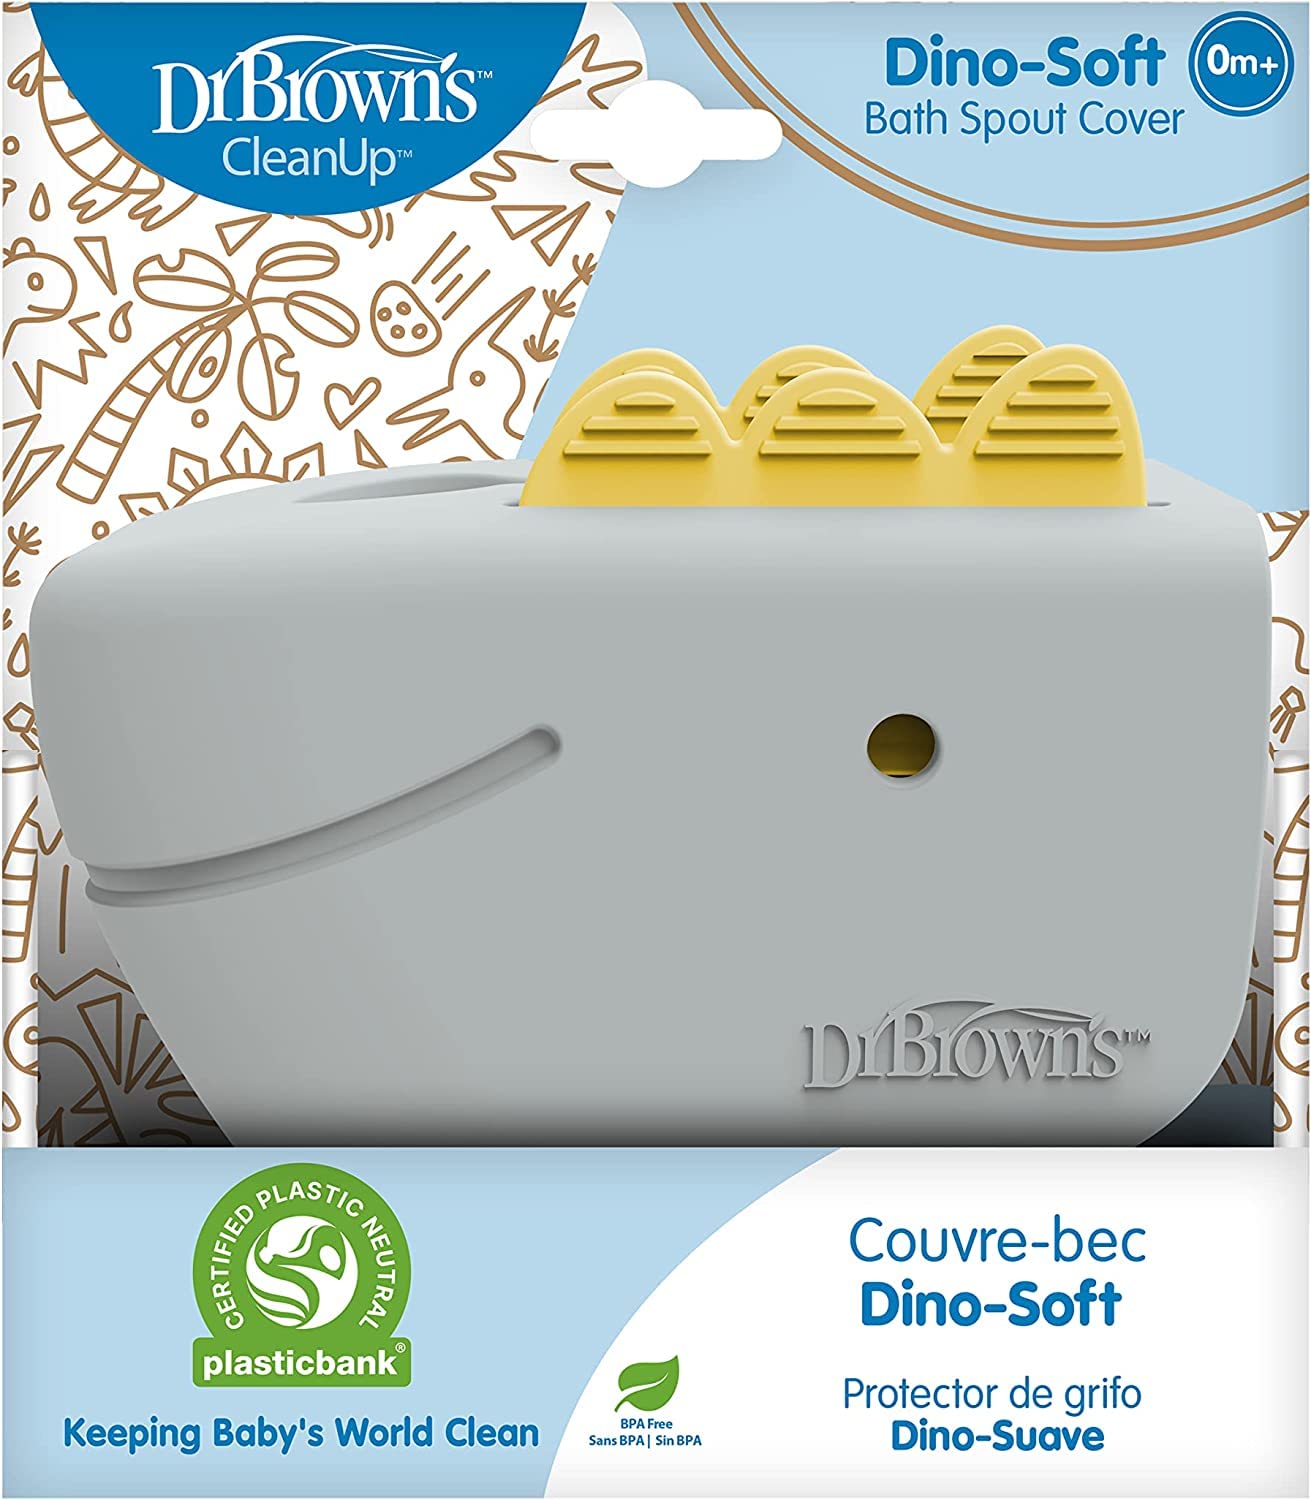 Dr. Brown's CleanUp Dino-Scoop Baby Bath Toy Organizer and Dino-Soft Baby Bath Spout Cover, Soft and Safe on Tub Faucet, Toddler Bathtub Safety for Kids, BPA Free, Certified Plastic Neutral